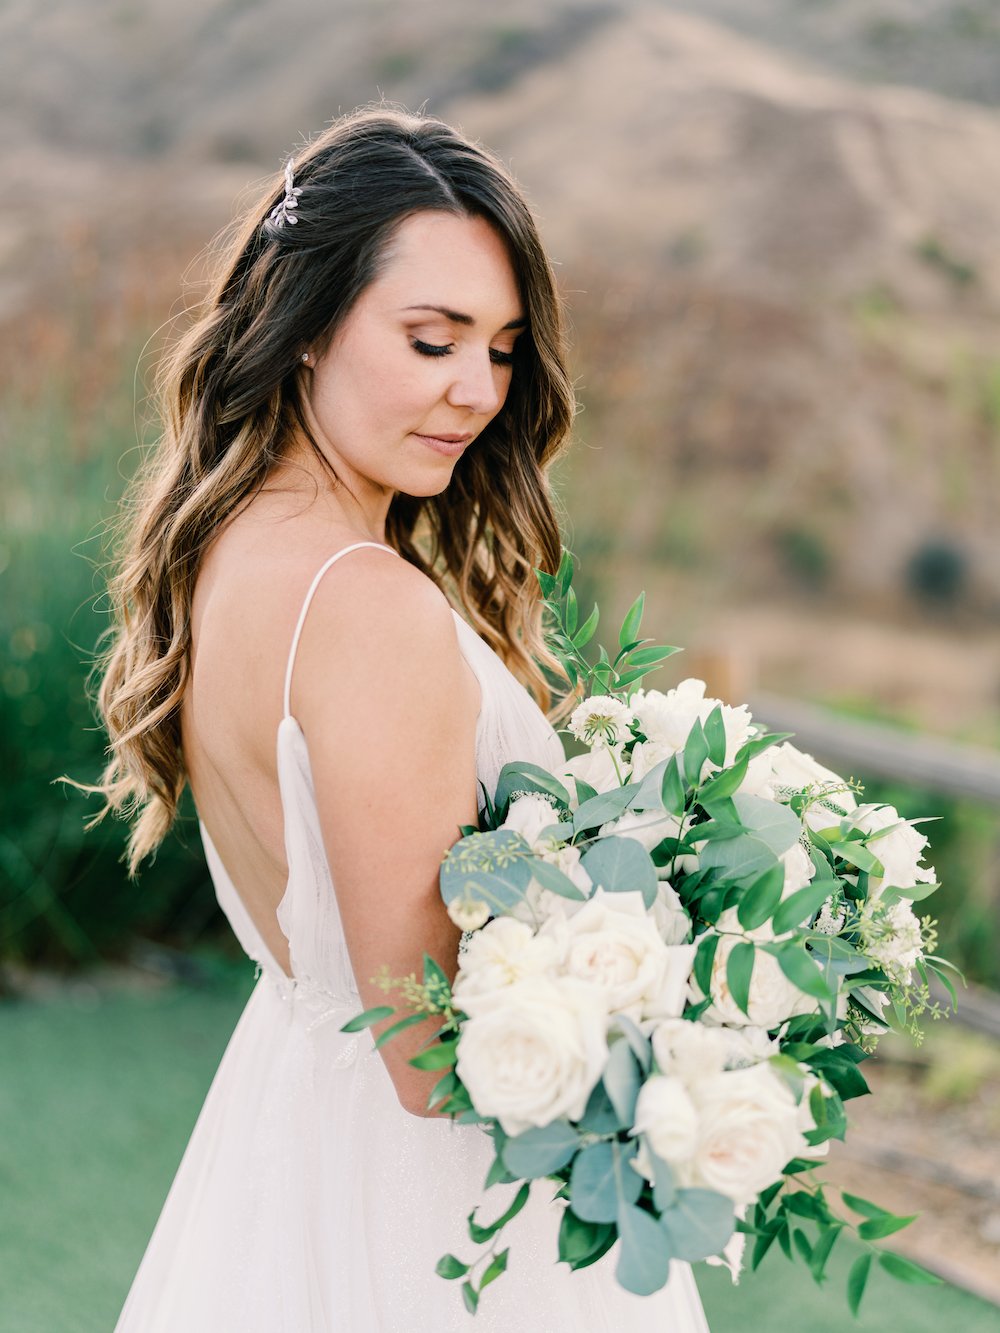 Bride wearing a spaghetti strap wedding dress holding an oversized white floral bouquet.